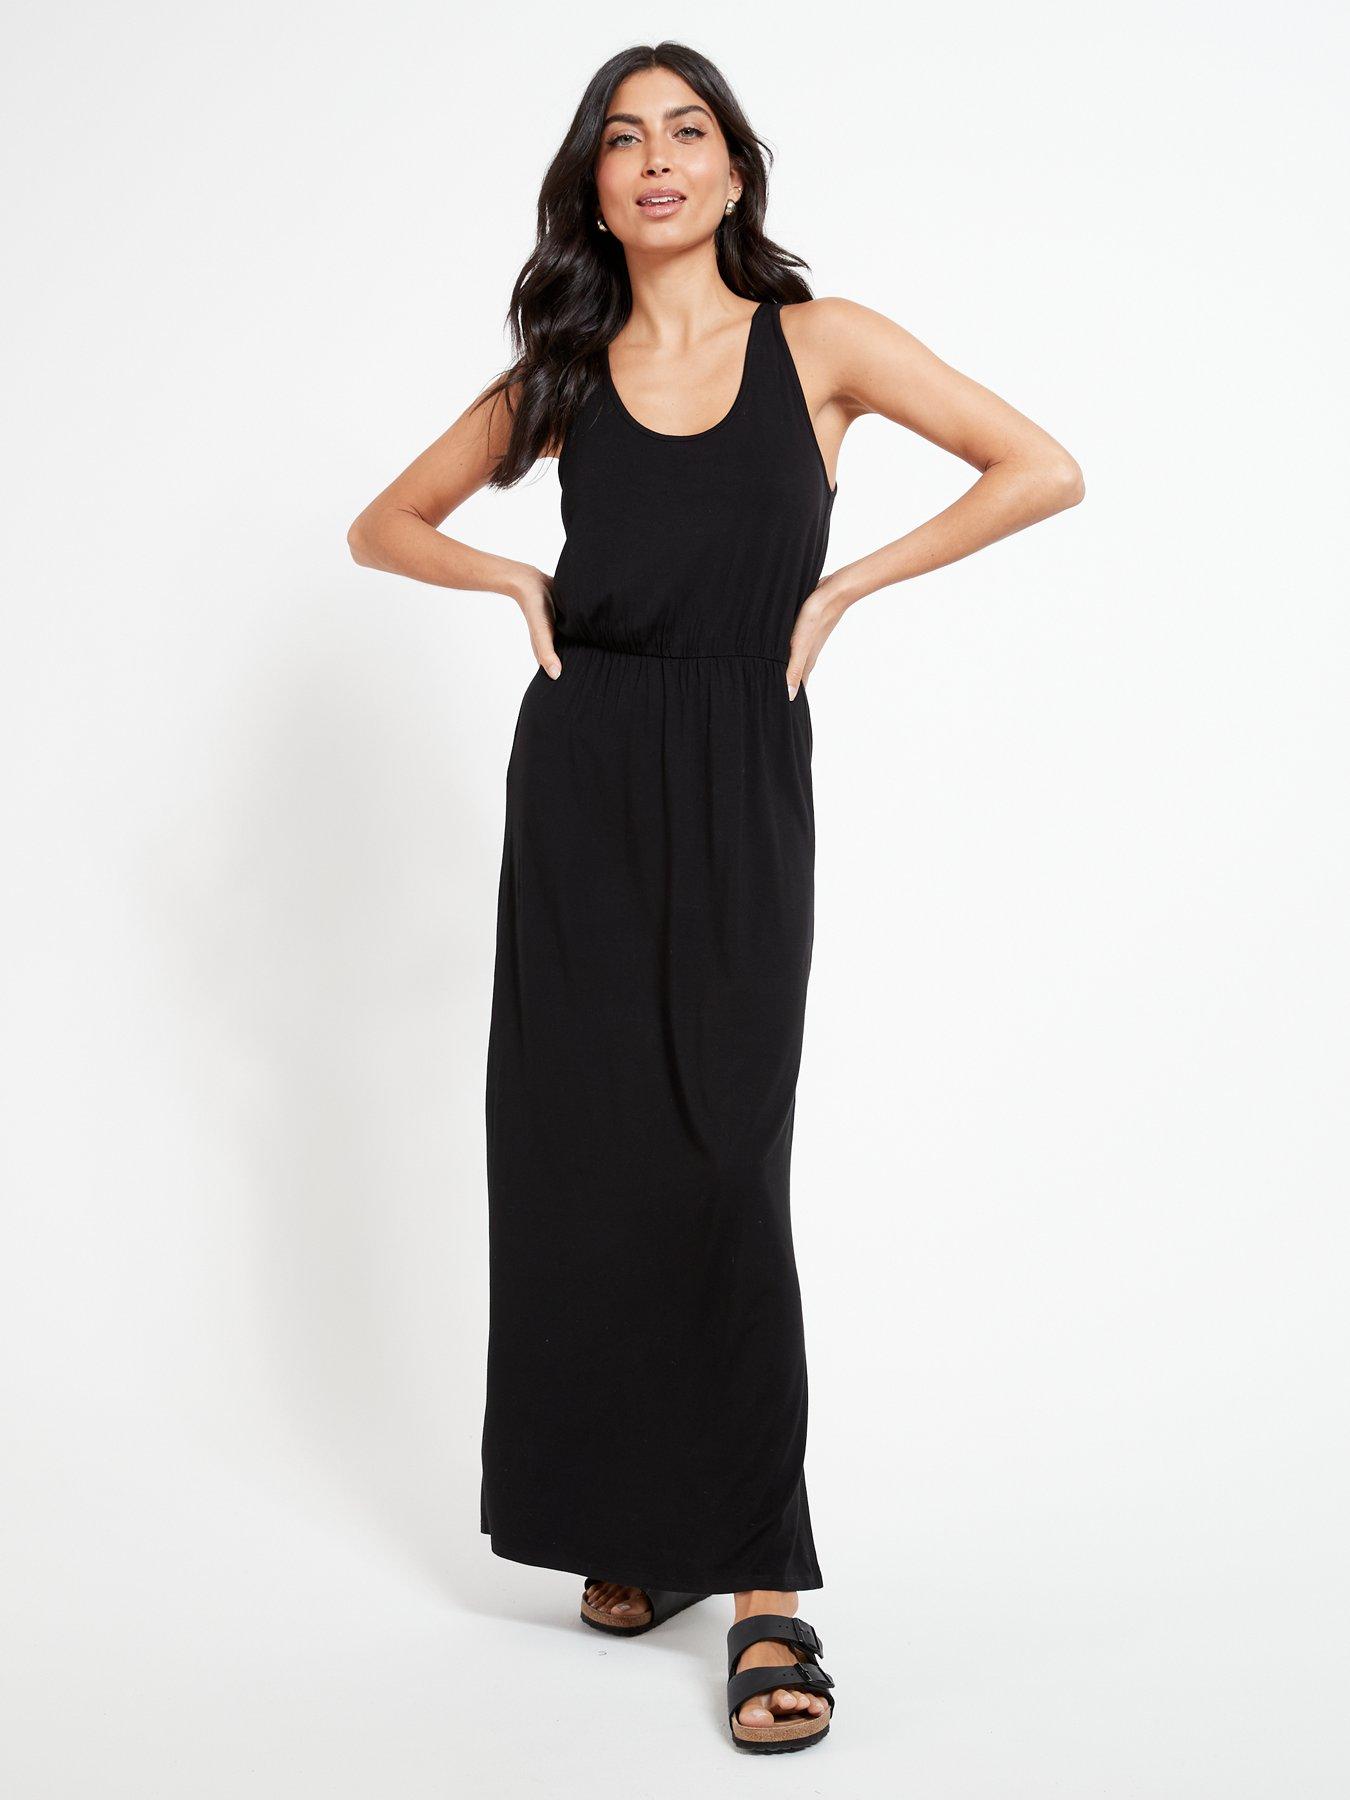 The Perfect Summer Dress For City Life: Long, Dark & Breezy - The Mom Edit